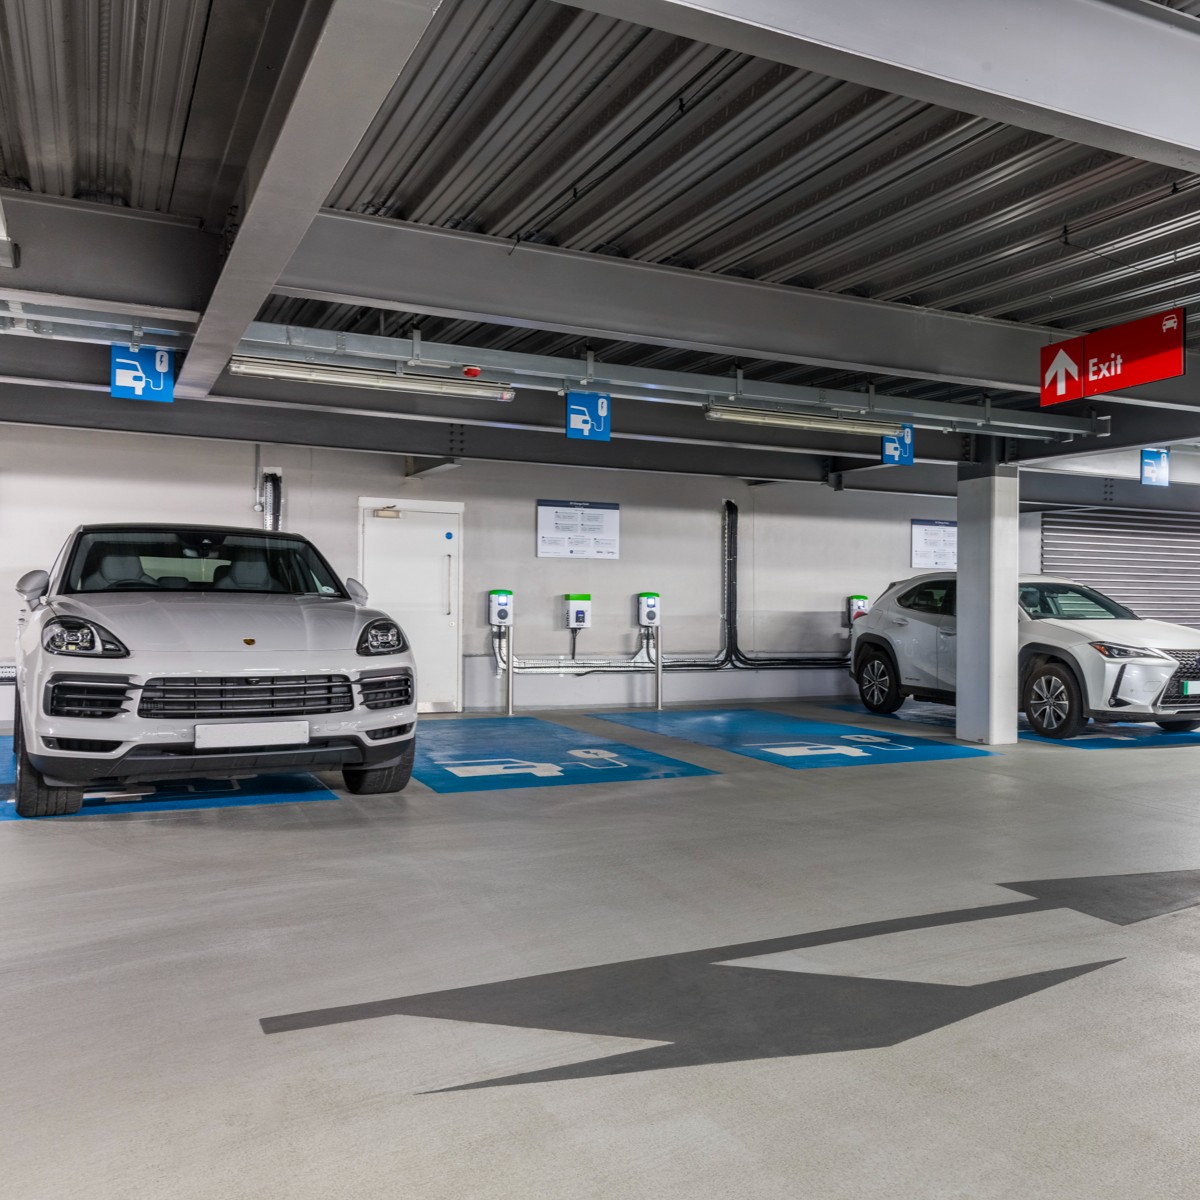 We’re feeling pumped at OMNi Edinburgh 🔋 Q-Park have installed 8 new EV charging points available for all EV drivers, on a pay as you go basis. Simply plug your vehicle in and then tap your contactless bank card on the payment terminal⚡ 📸 @qpark_uk